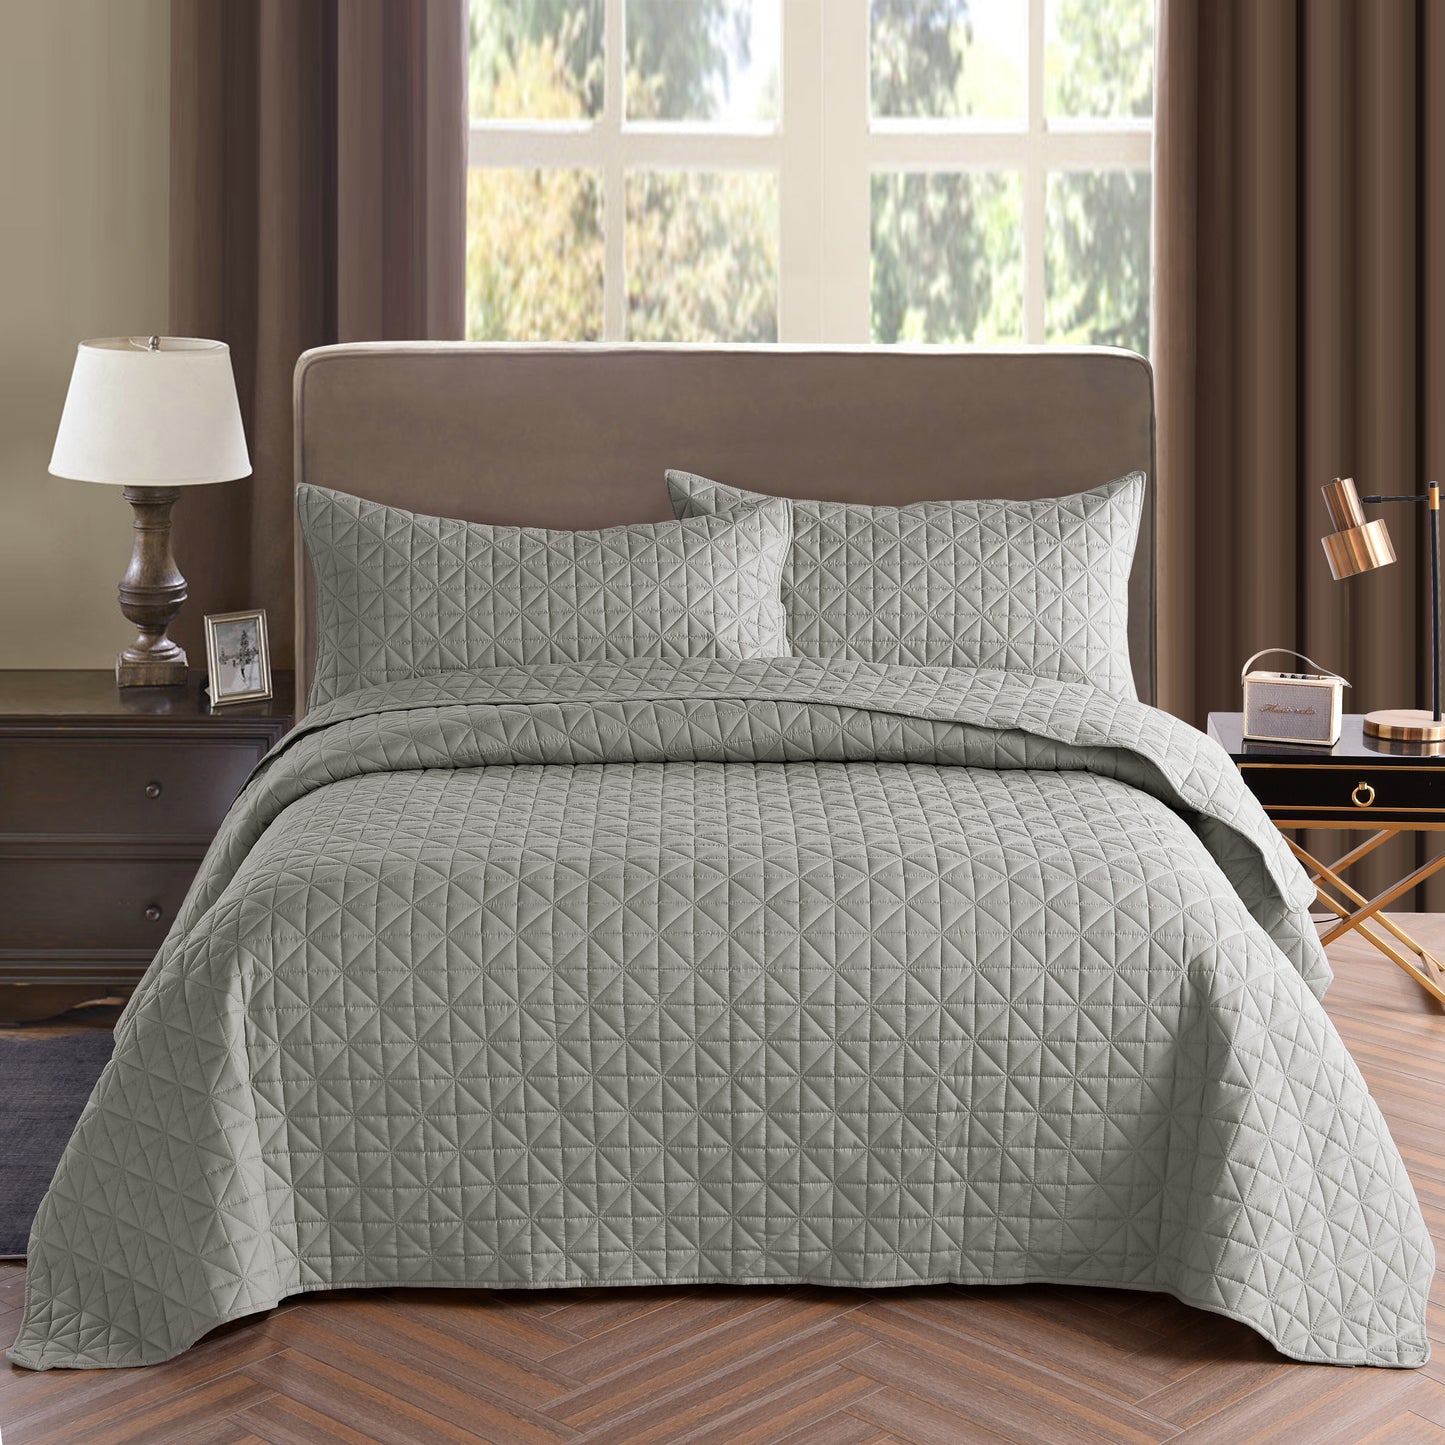 Exclusivo Mezcla 3-Piece King/Queen/Full/Twin Size Quilt Set with Pillow Shams, Grid Quilted Bedspread/Coverlet/Bed Cover -Soft, Lightweight and Reversible